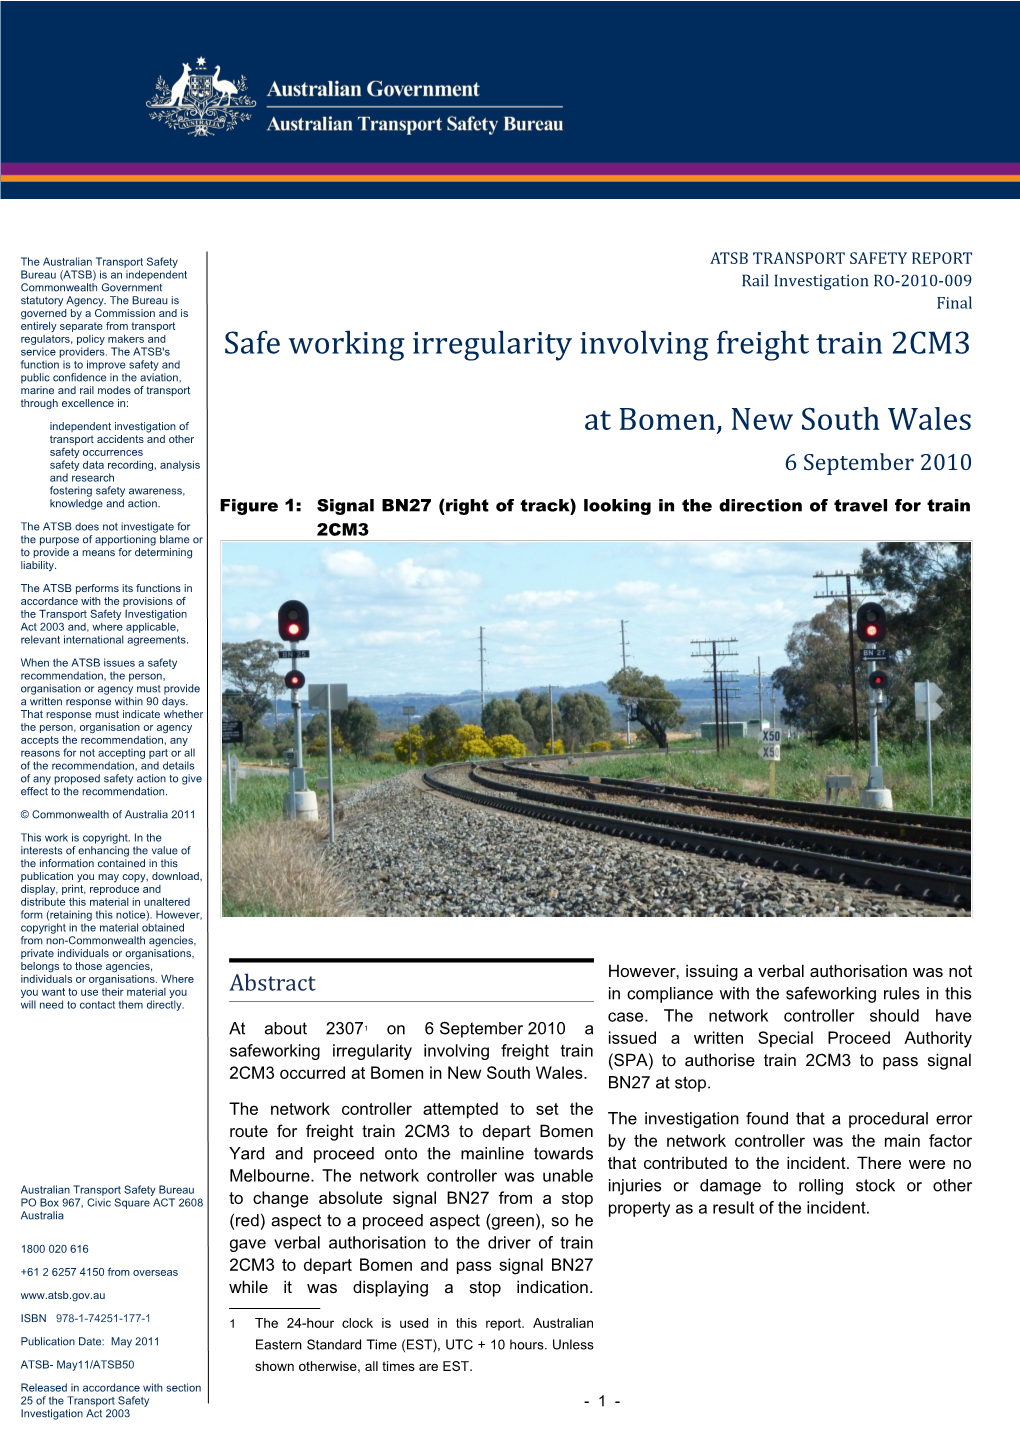 Safe Working Irregularity Involving Freight Train 2CM3 at Bomen, New South Wales 6 September